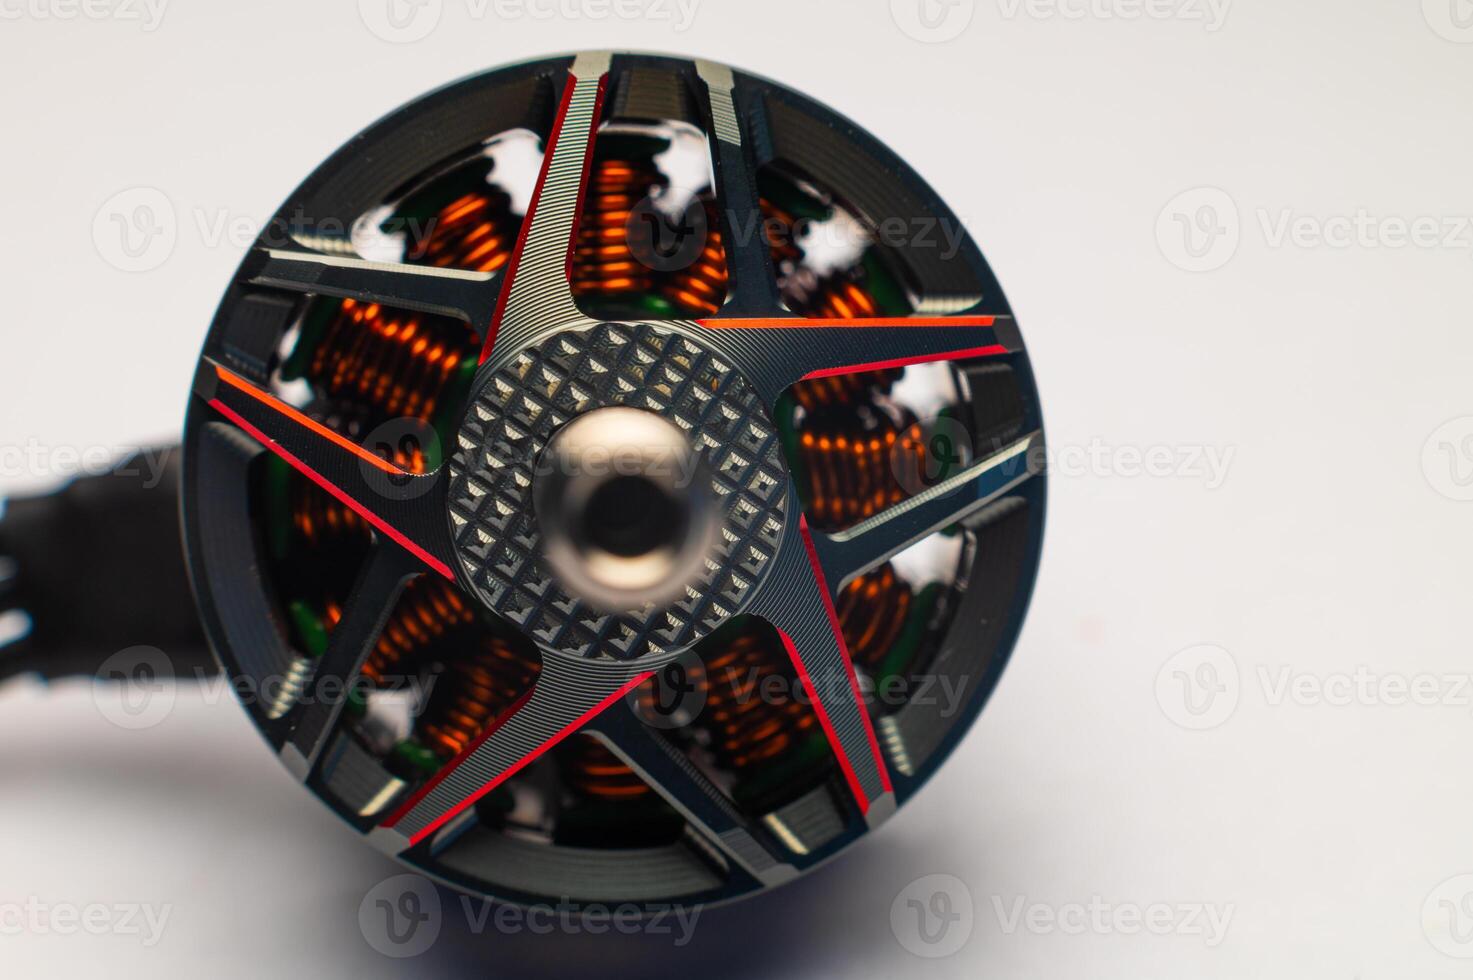 A small brushless motor for assembling an FPV quadcopter. Brushless electric motor photo